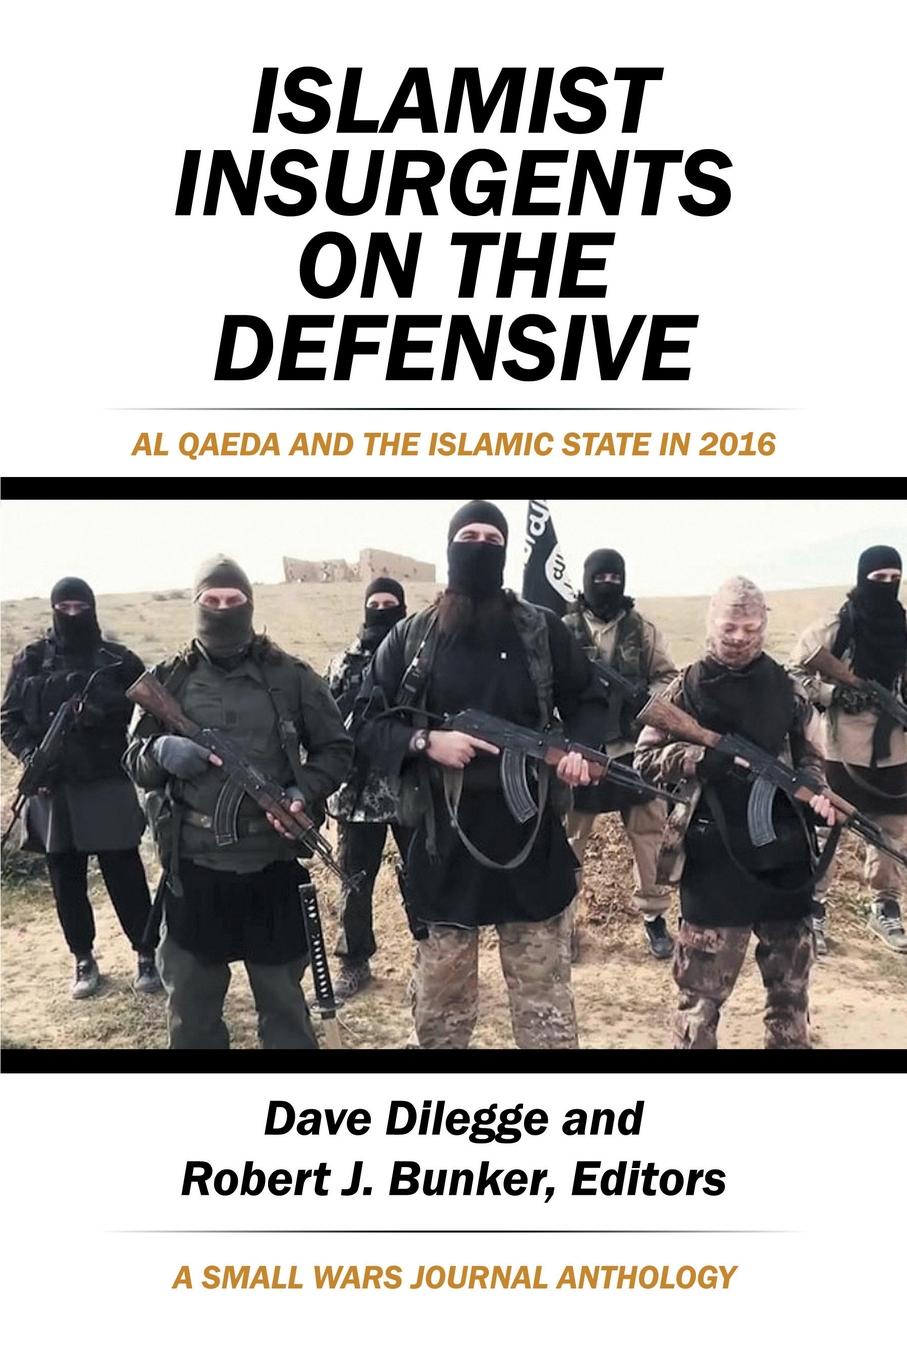 Islamist Insurgents on the Defensive. Al-Qaeda and the Islamic State in 2016 a Small Wars Journal Anthology